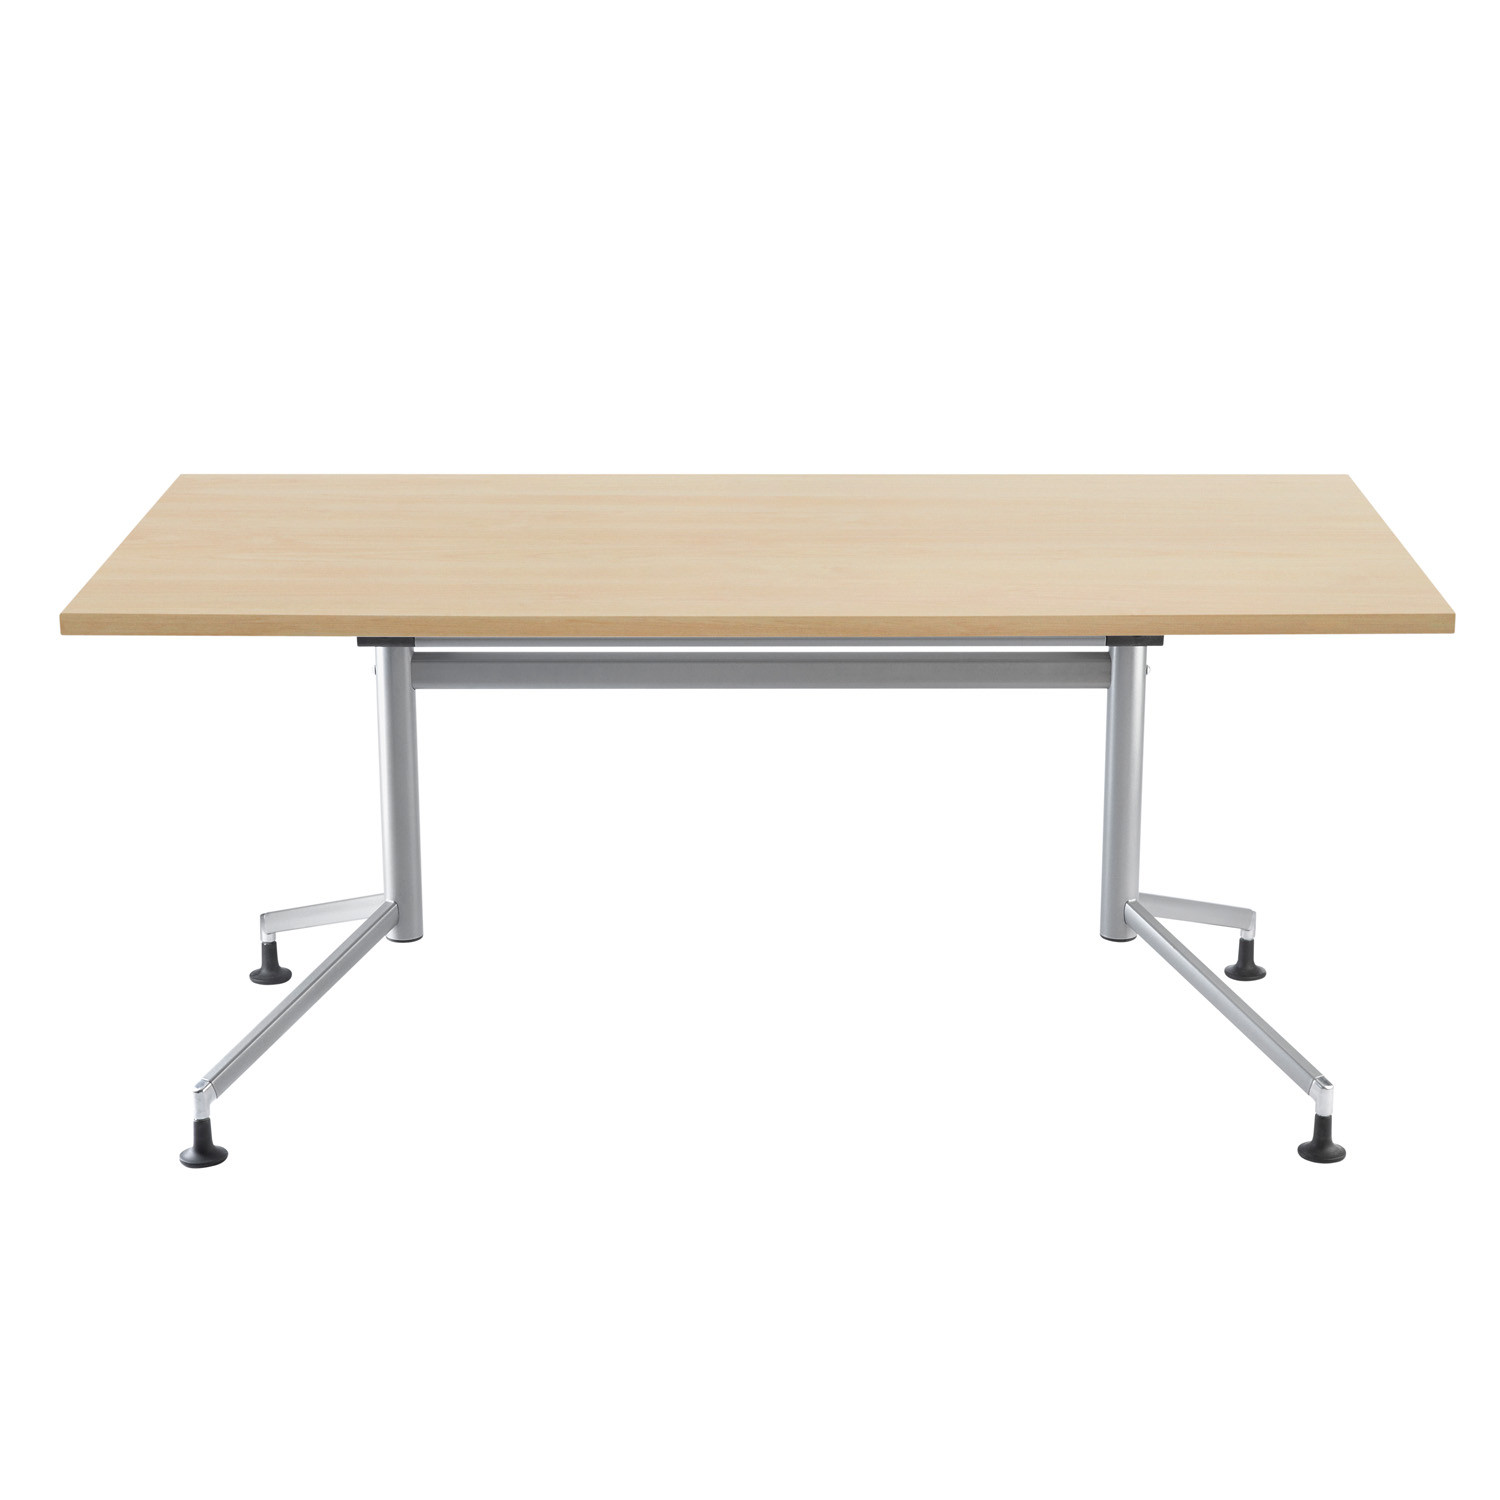 IS Meeting Table by Roger Webb Associates